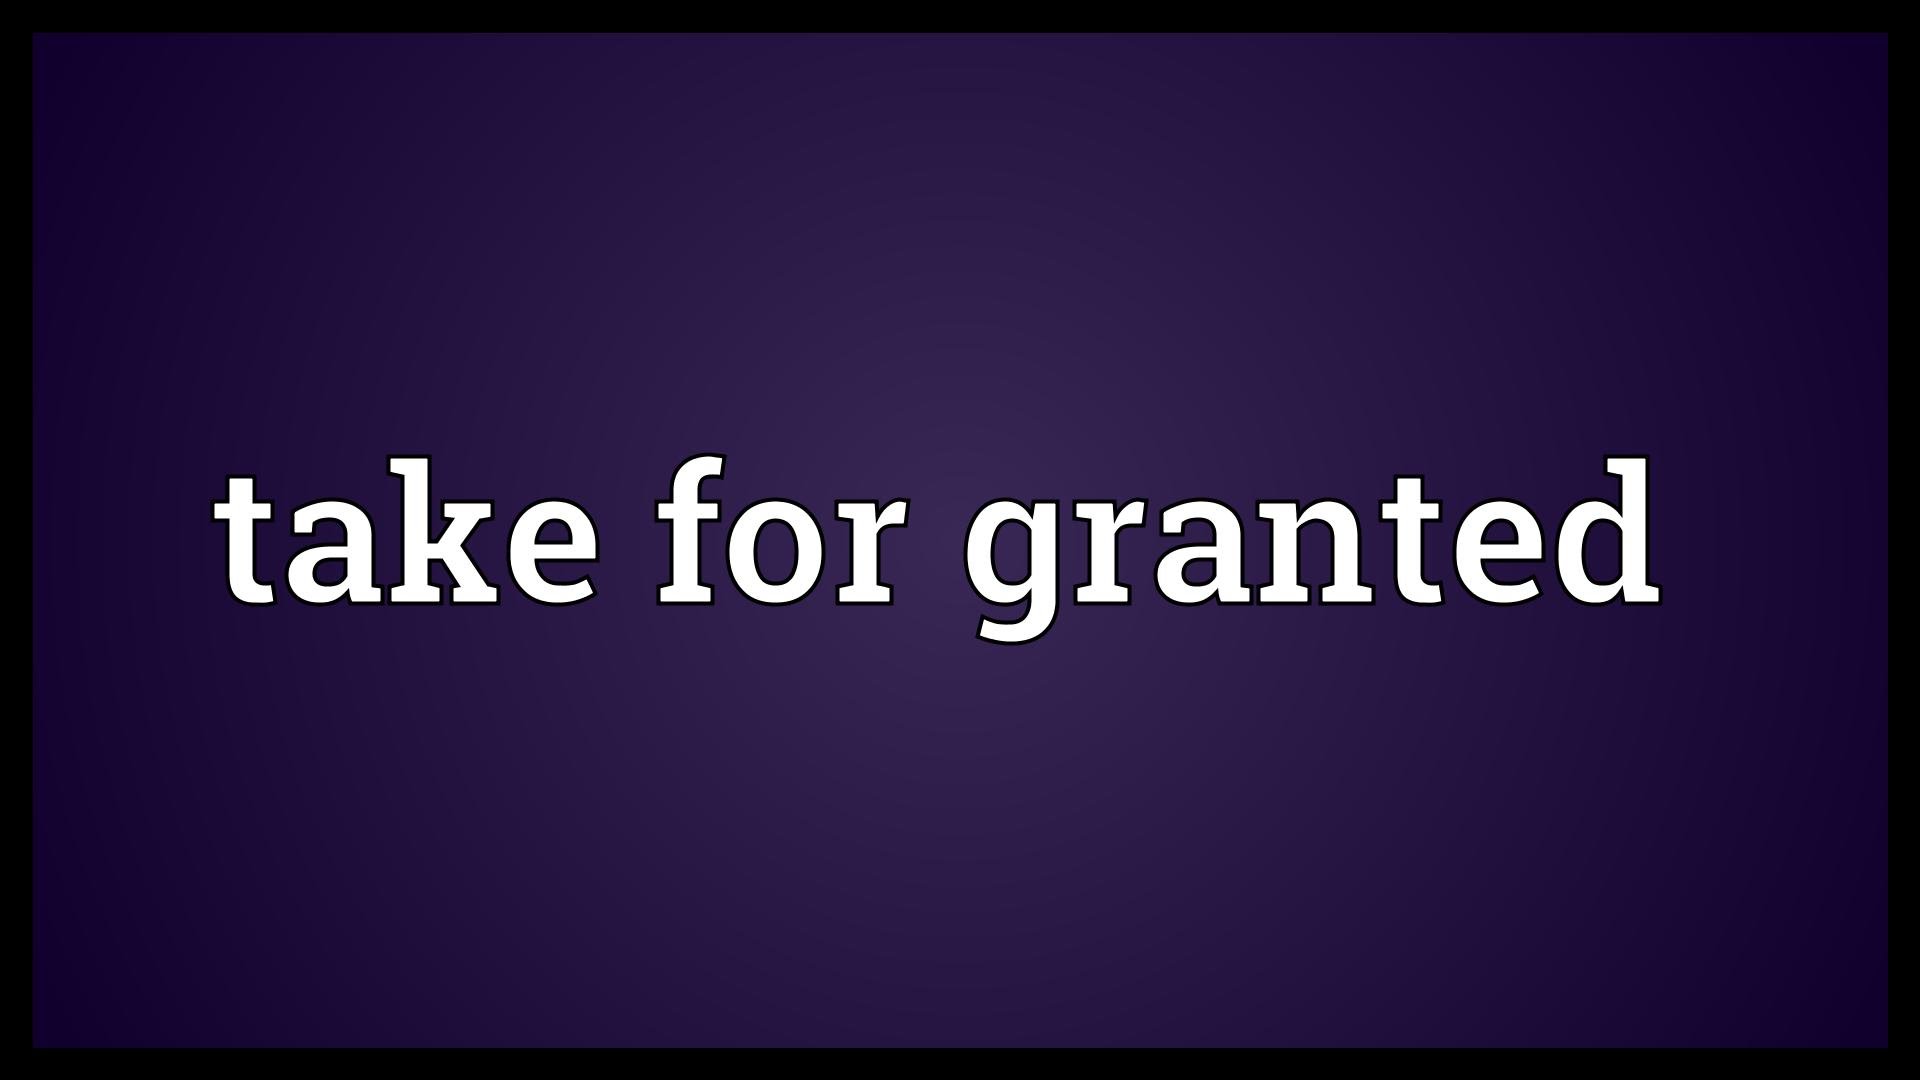 Granted more. Take for Granted. Take for Granted idiom. Take it for Granted. The take.